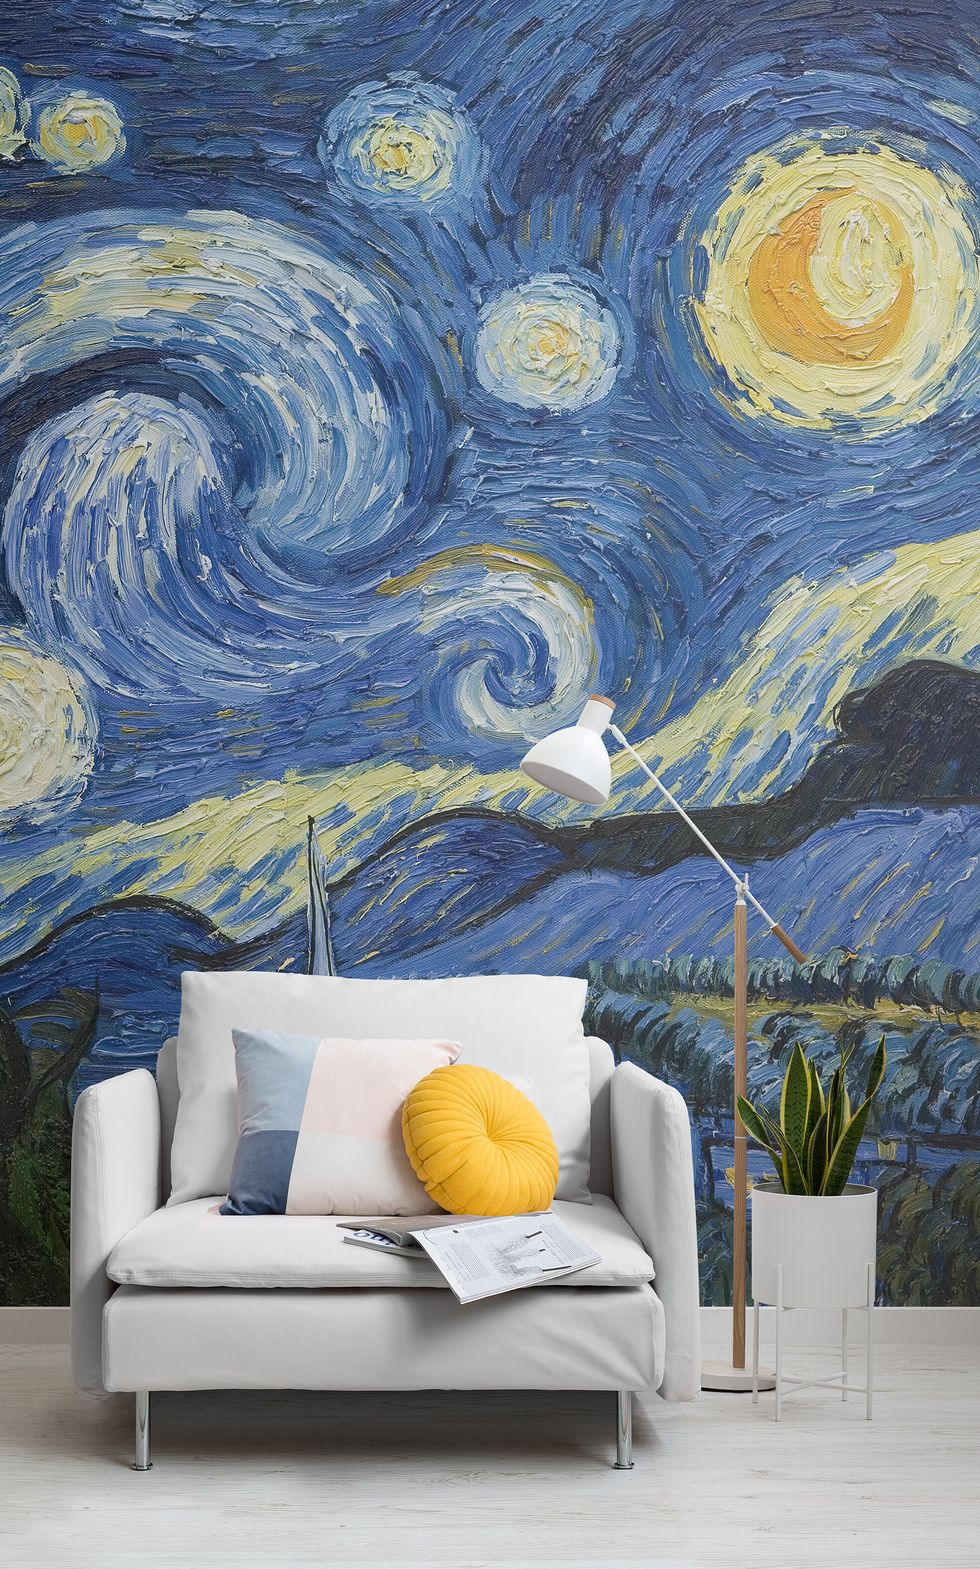 Van Gogh Iconic Paintings are available as wallpaper in celebration of his 130-year anniversary